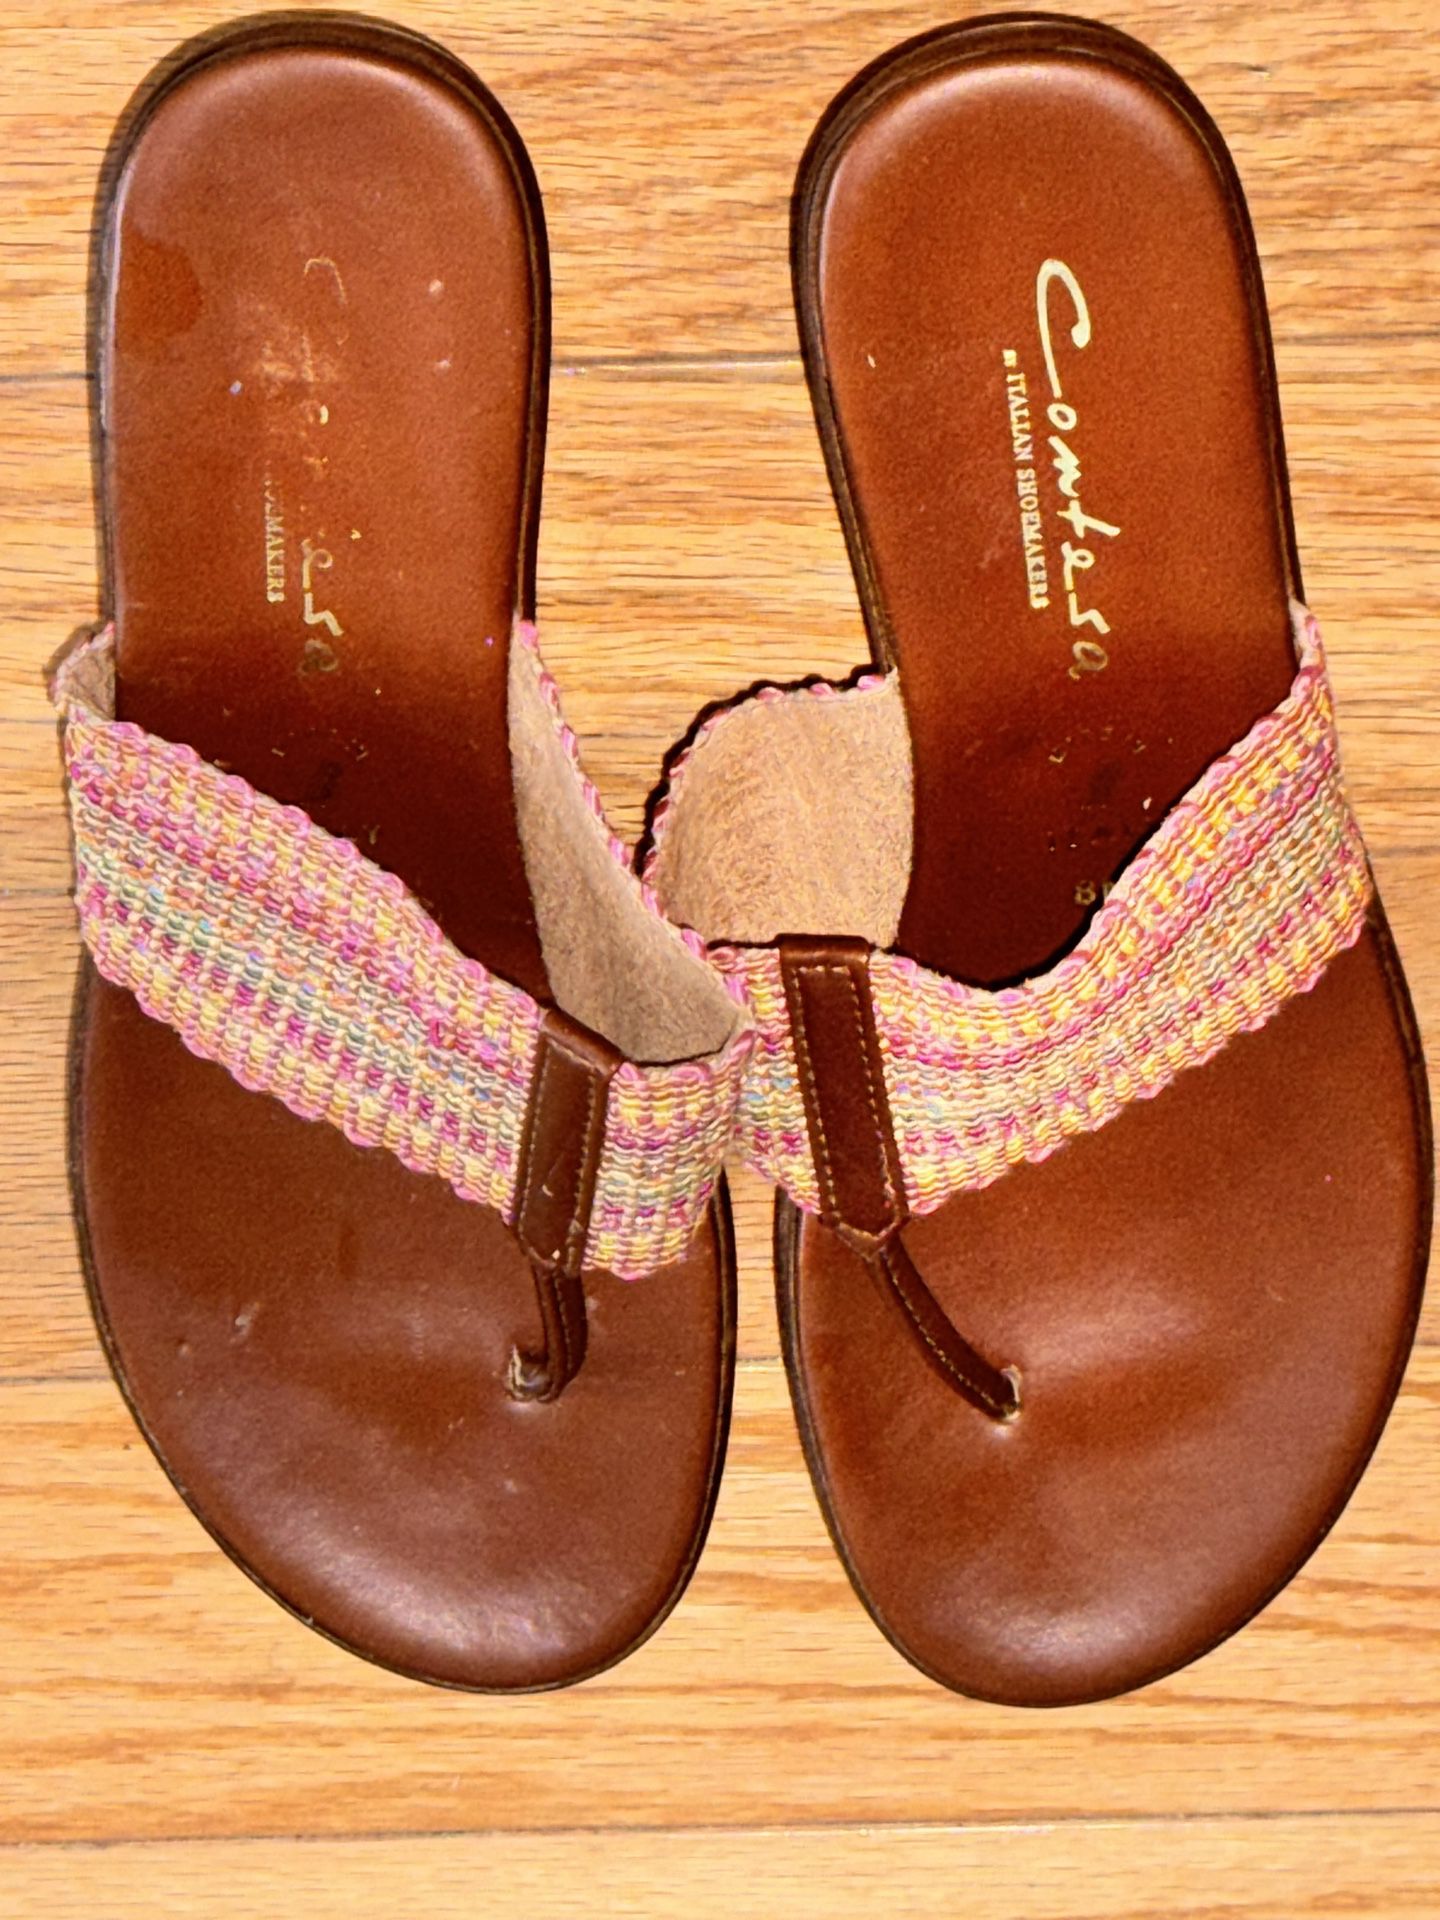  Women's Pink and Tan Sandals